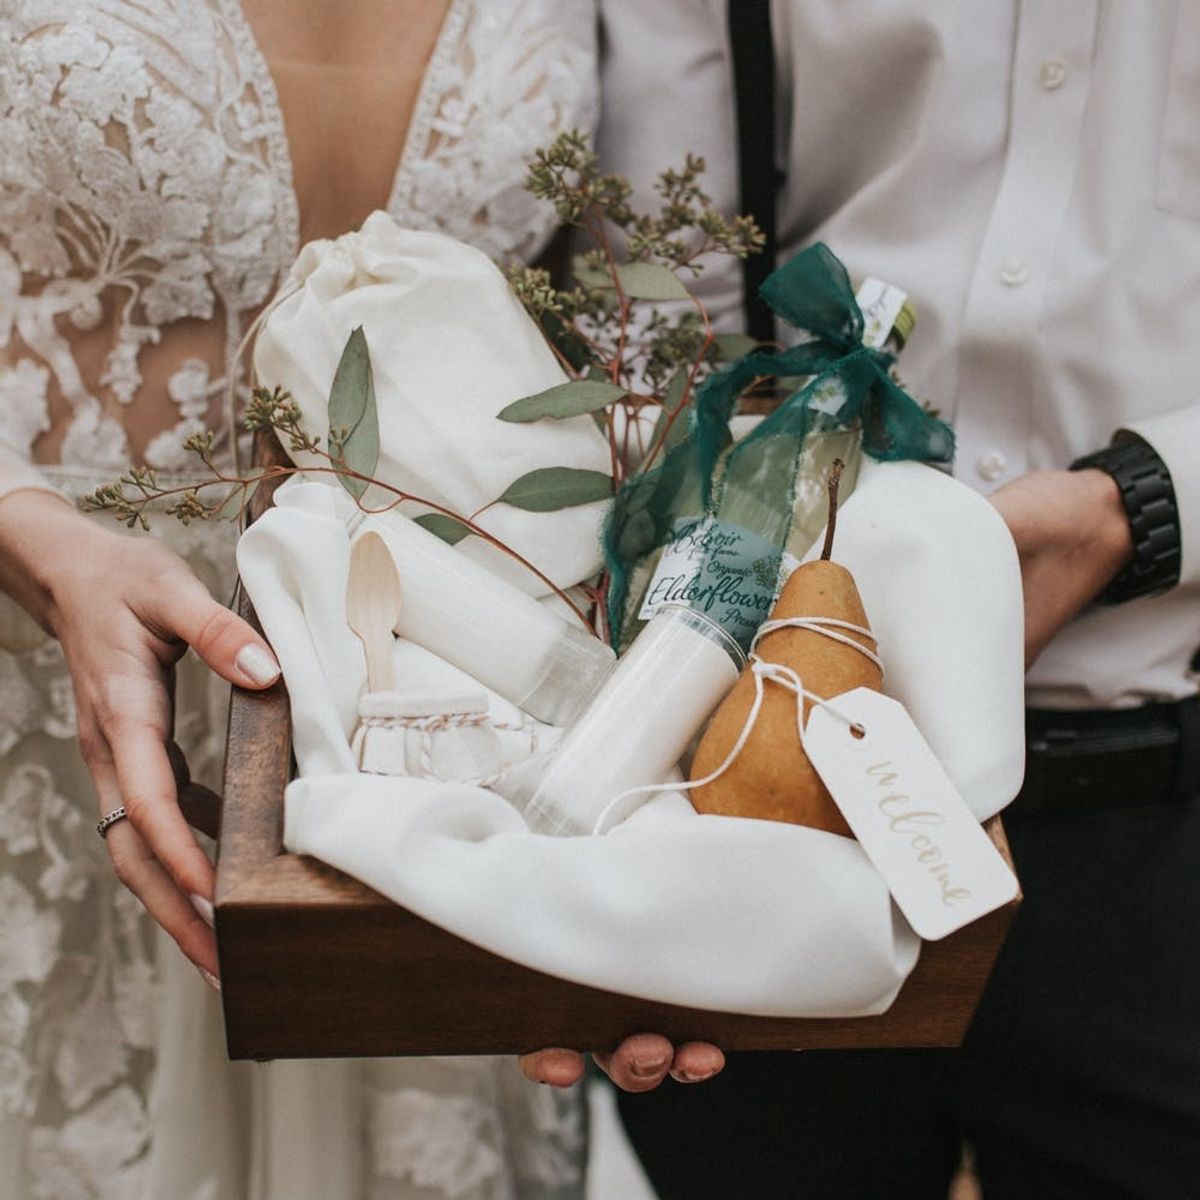 5 Off-Registry Wedding Gift Ideas to Stand Out from the Crowd in 2019